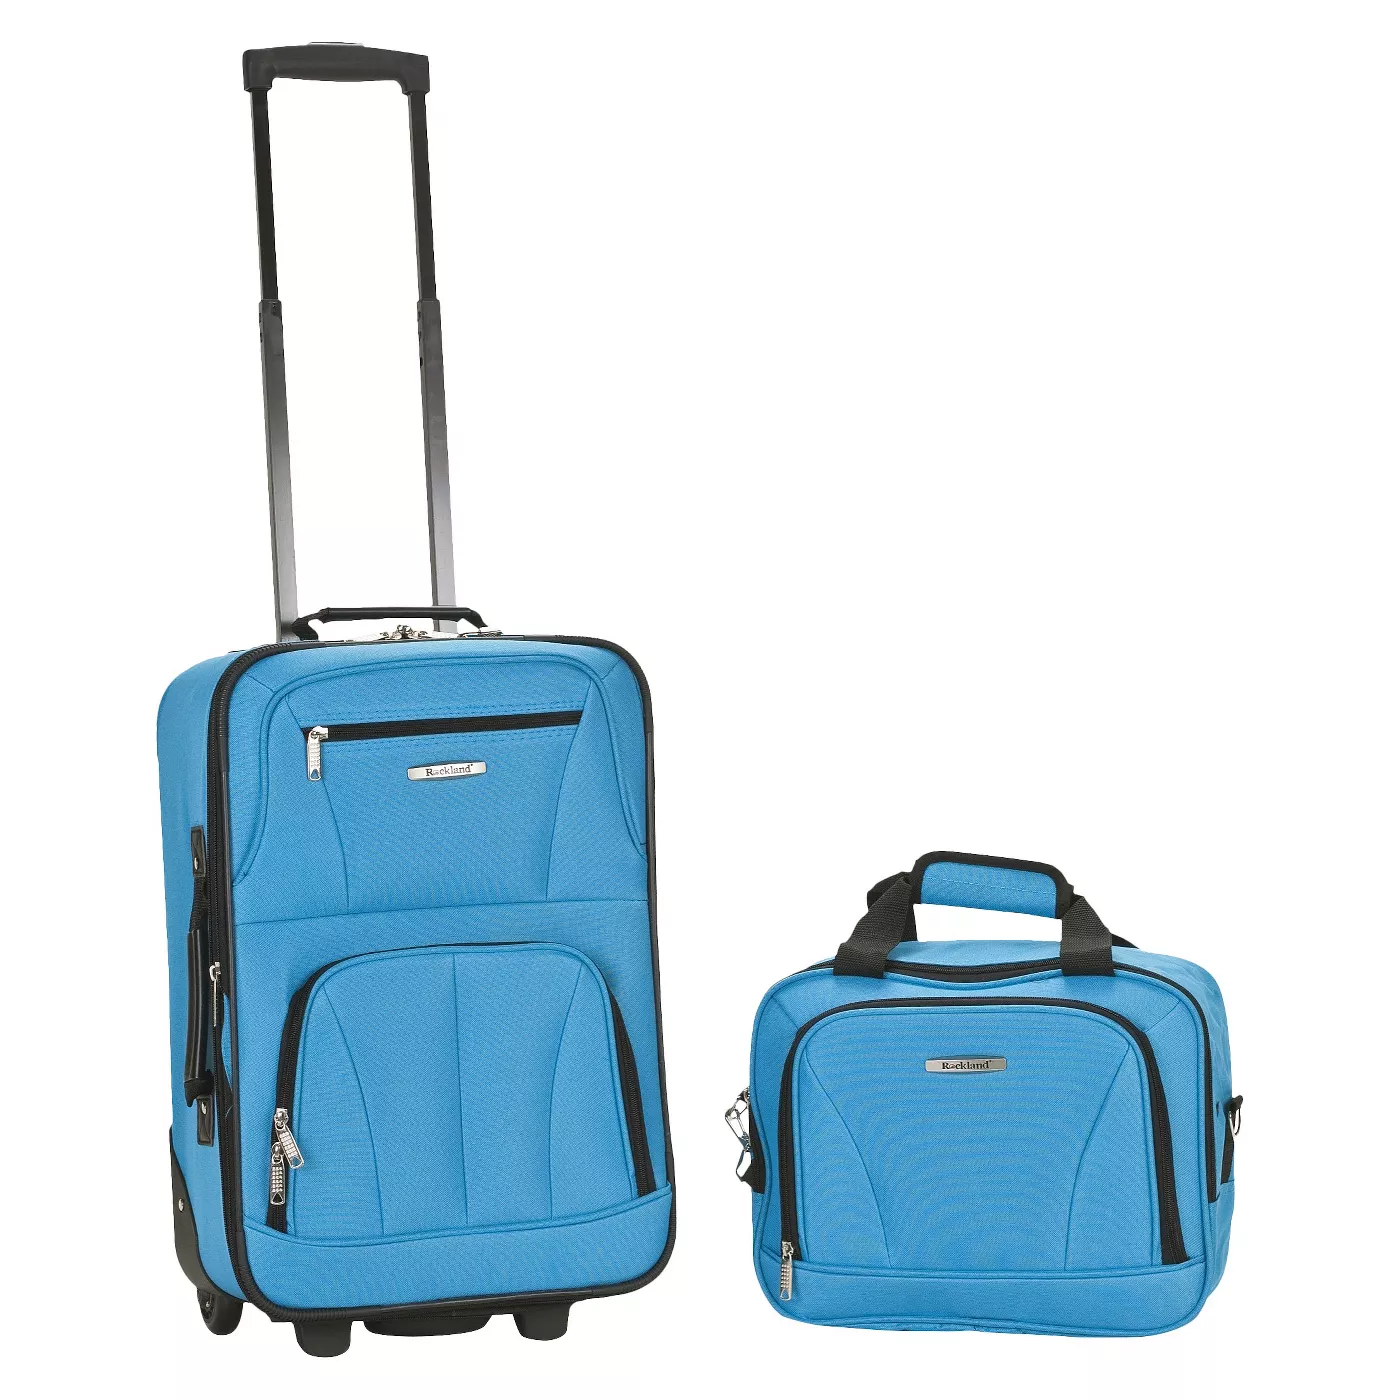 Rockland Rio 2pc Carry On Luggage Set - Turquoise - image 1 of 4